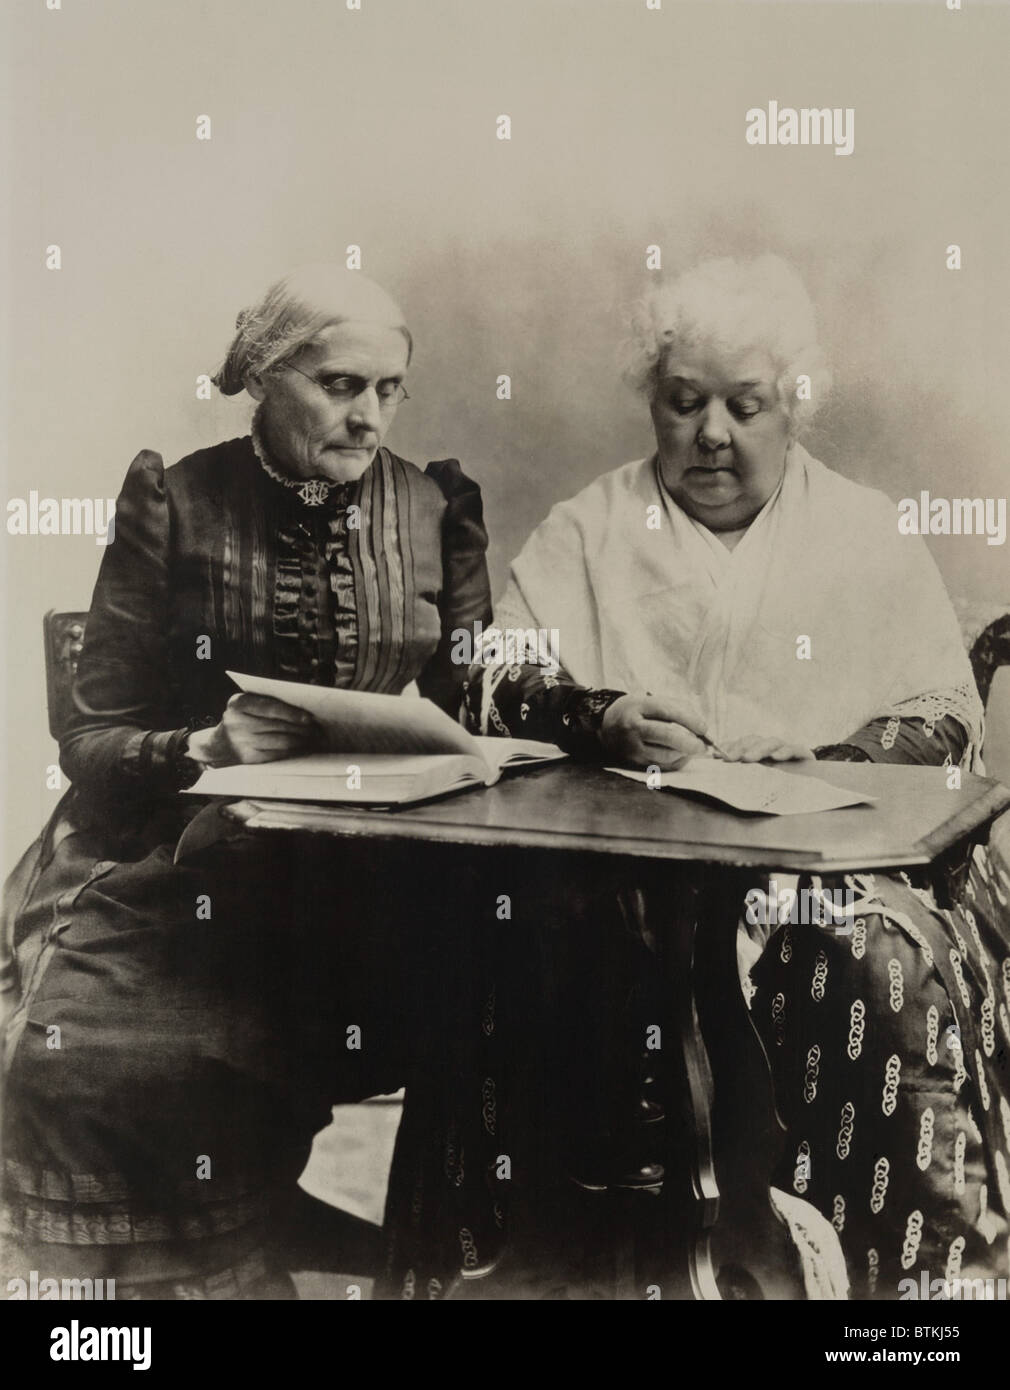 Susan B. Anthony and Elizabeth Cady Stanton were the two great leaders of the 19th century American Women's Suffrage and Equal Rights cause. Ca. 1891. Stock Photo